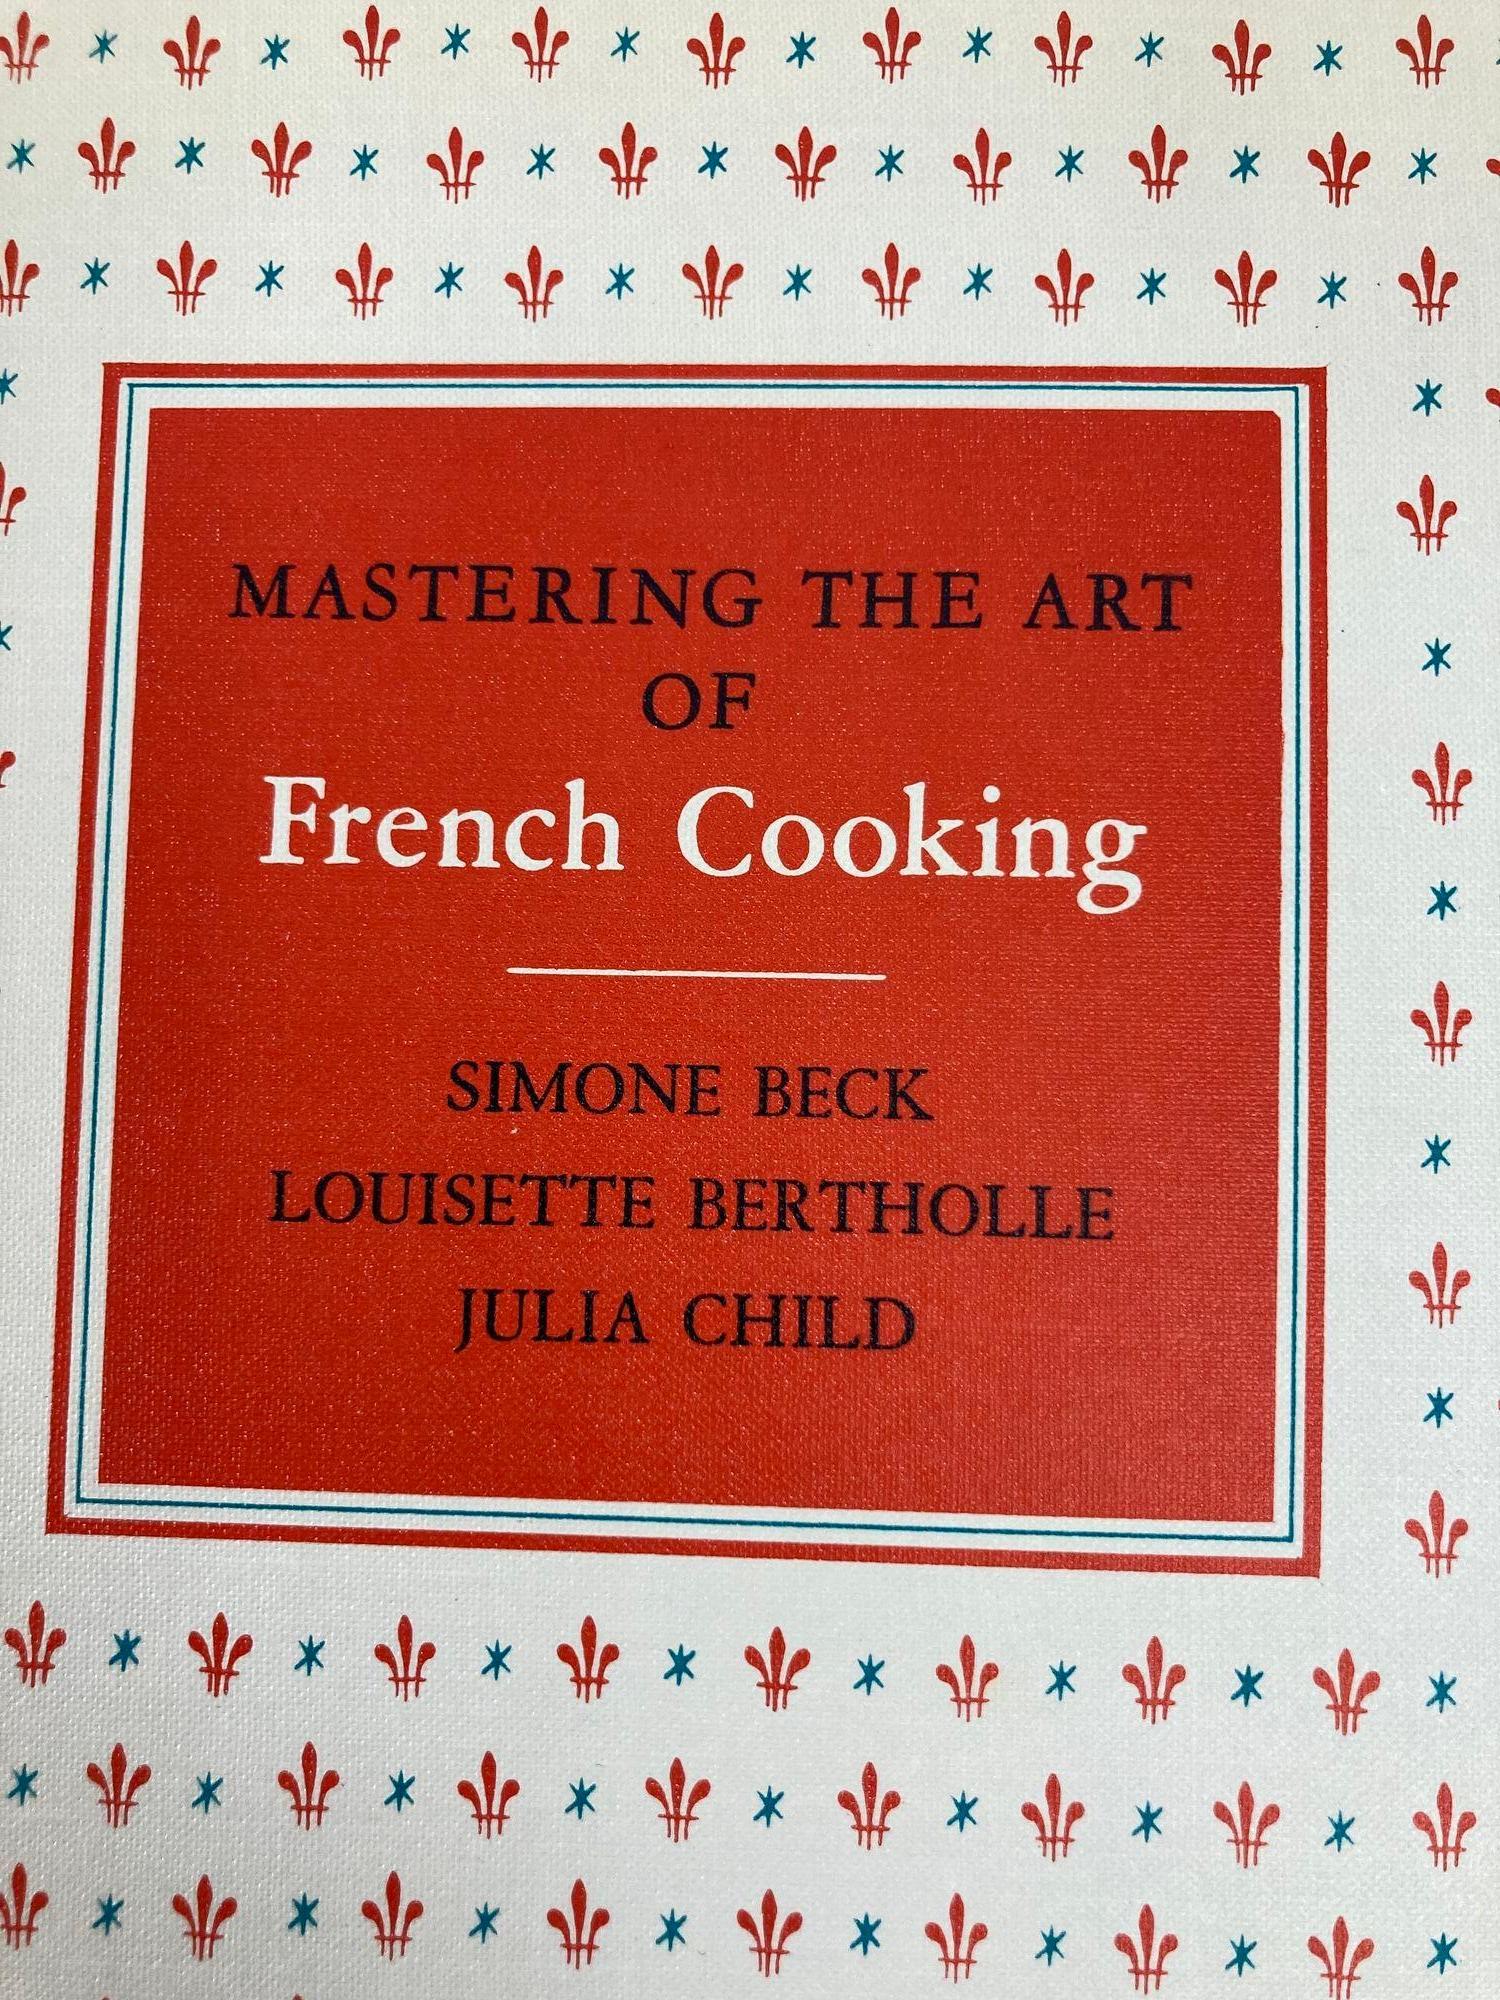 Paper Julia Child Mastering the Art of French Cooking Book 1964 For Sale